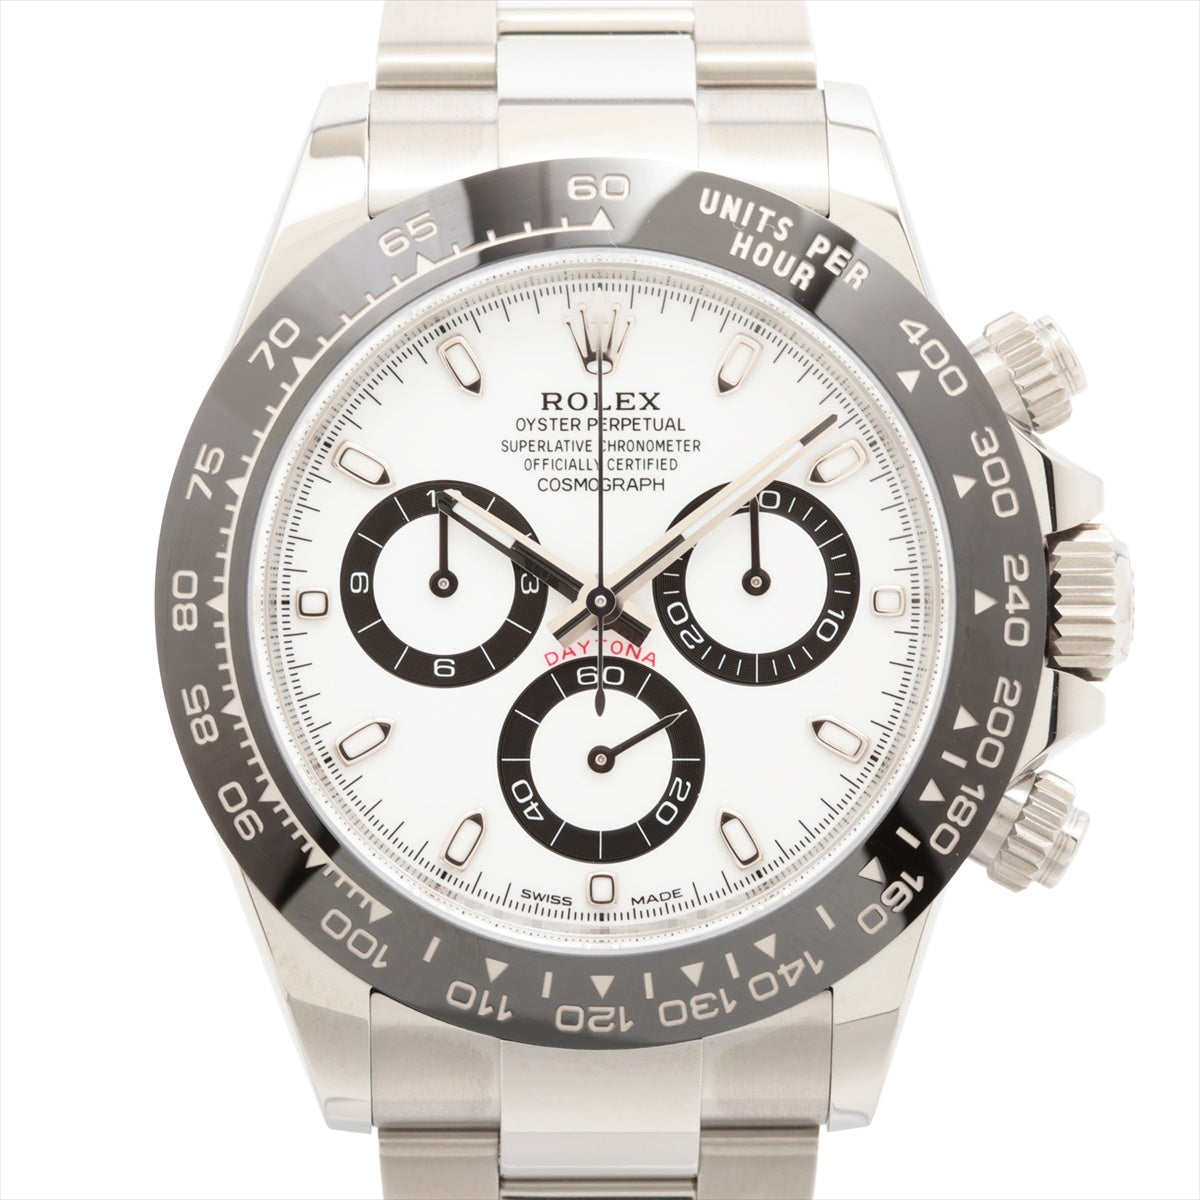 Rolex Daytona 116500LN SS AT White Dial 2 Extra Links